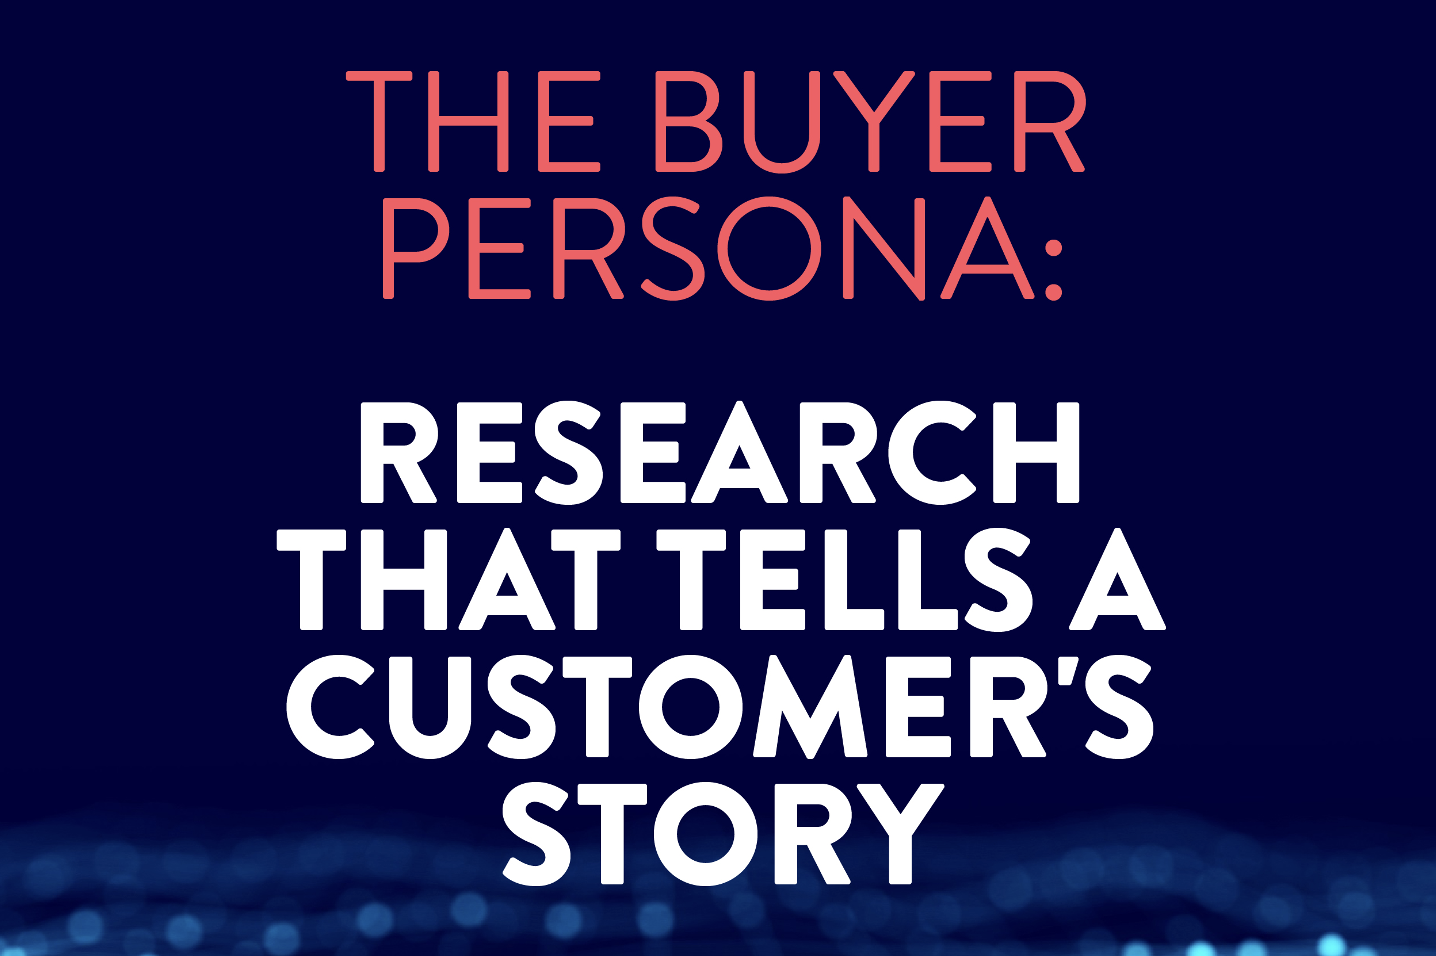 You are currently viewing The Buyer Persona: Research That Tells a Customer’s Story